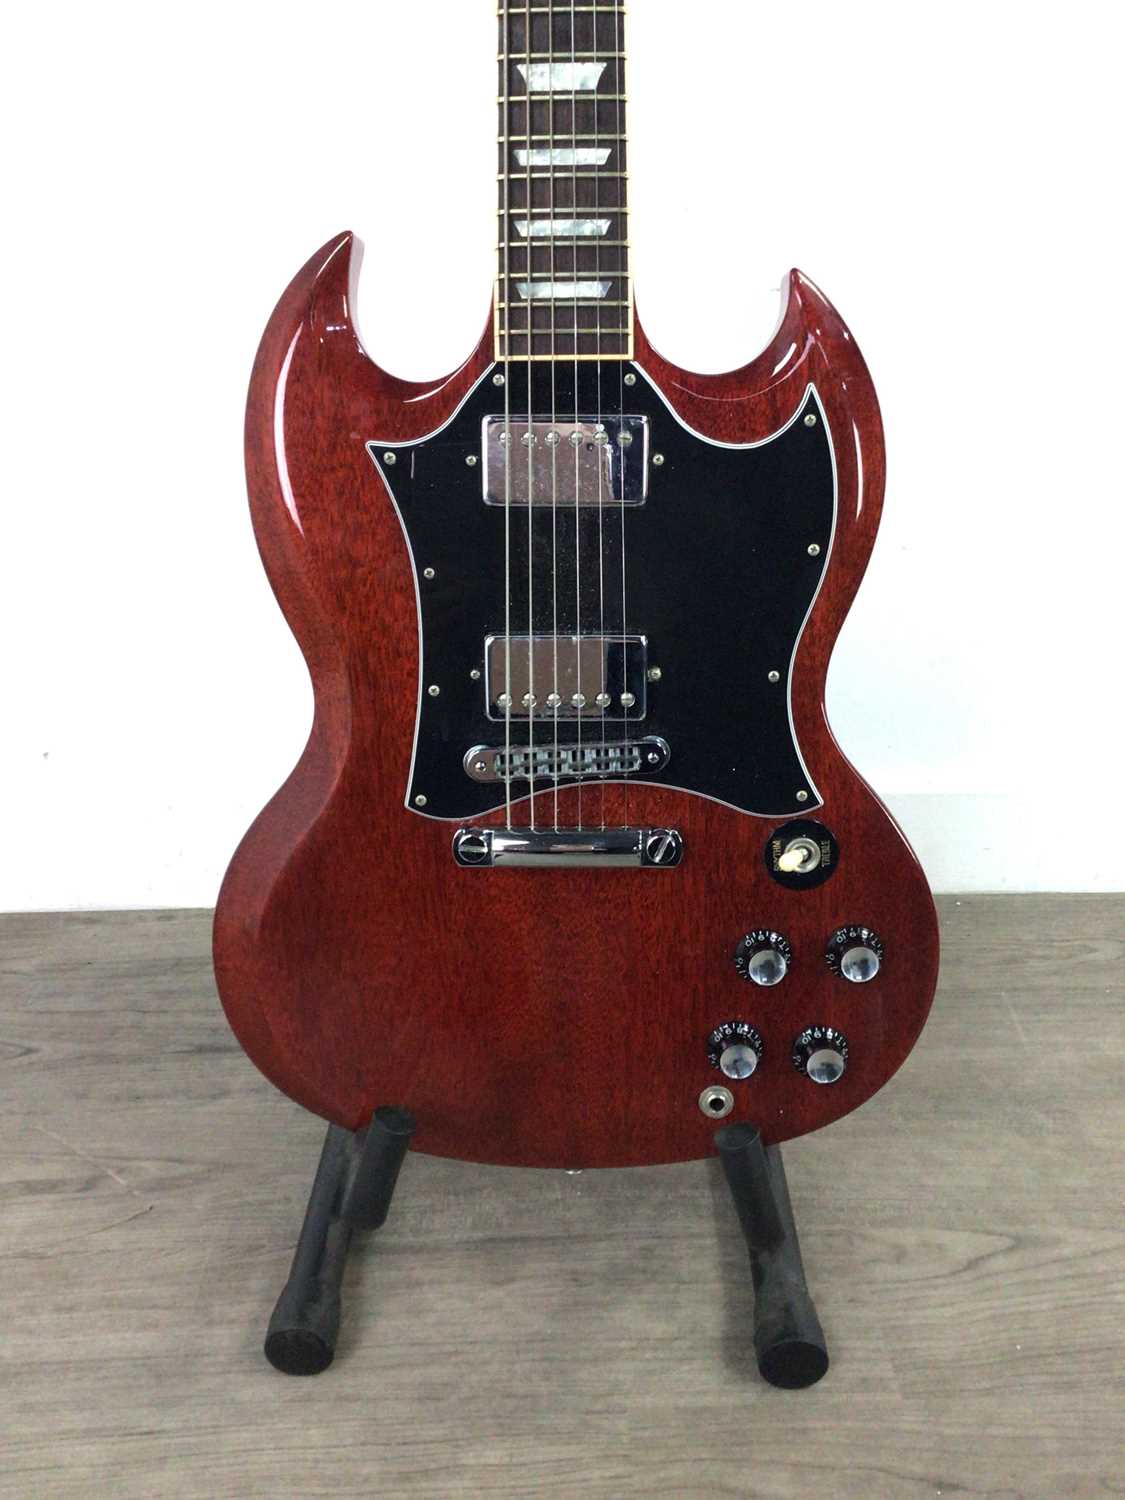 Lot 664 - A GIBSON SG ELECTRIC GUITAR